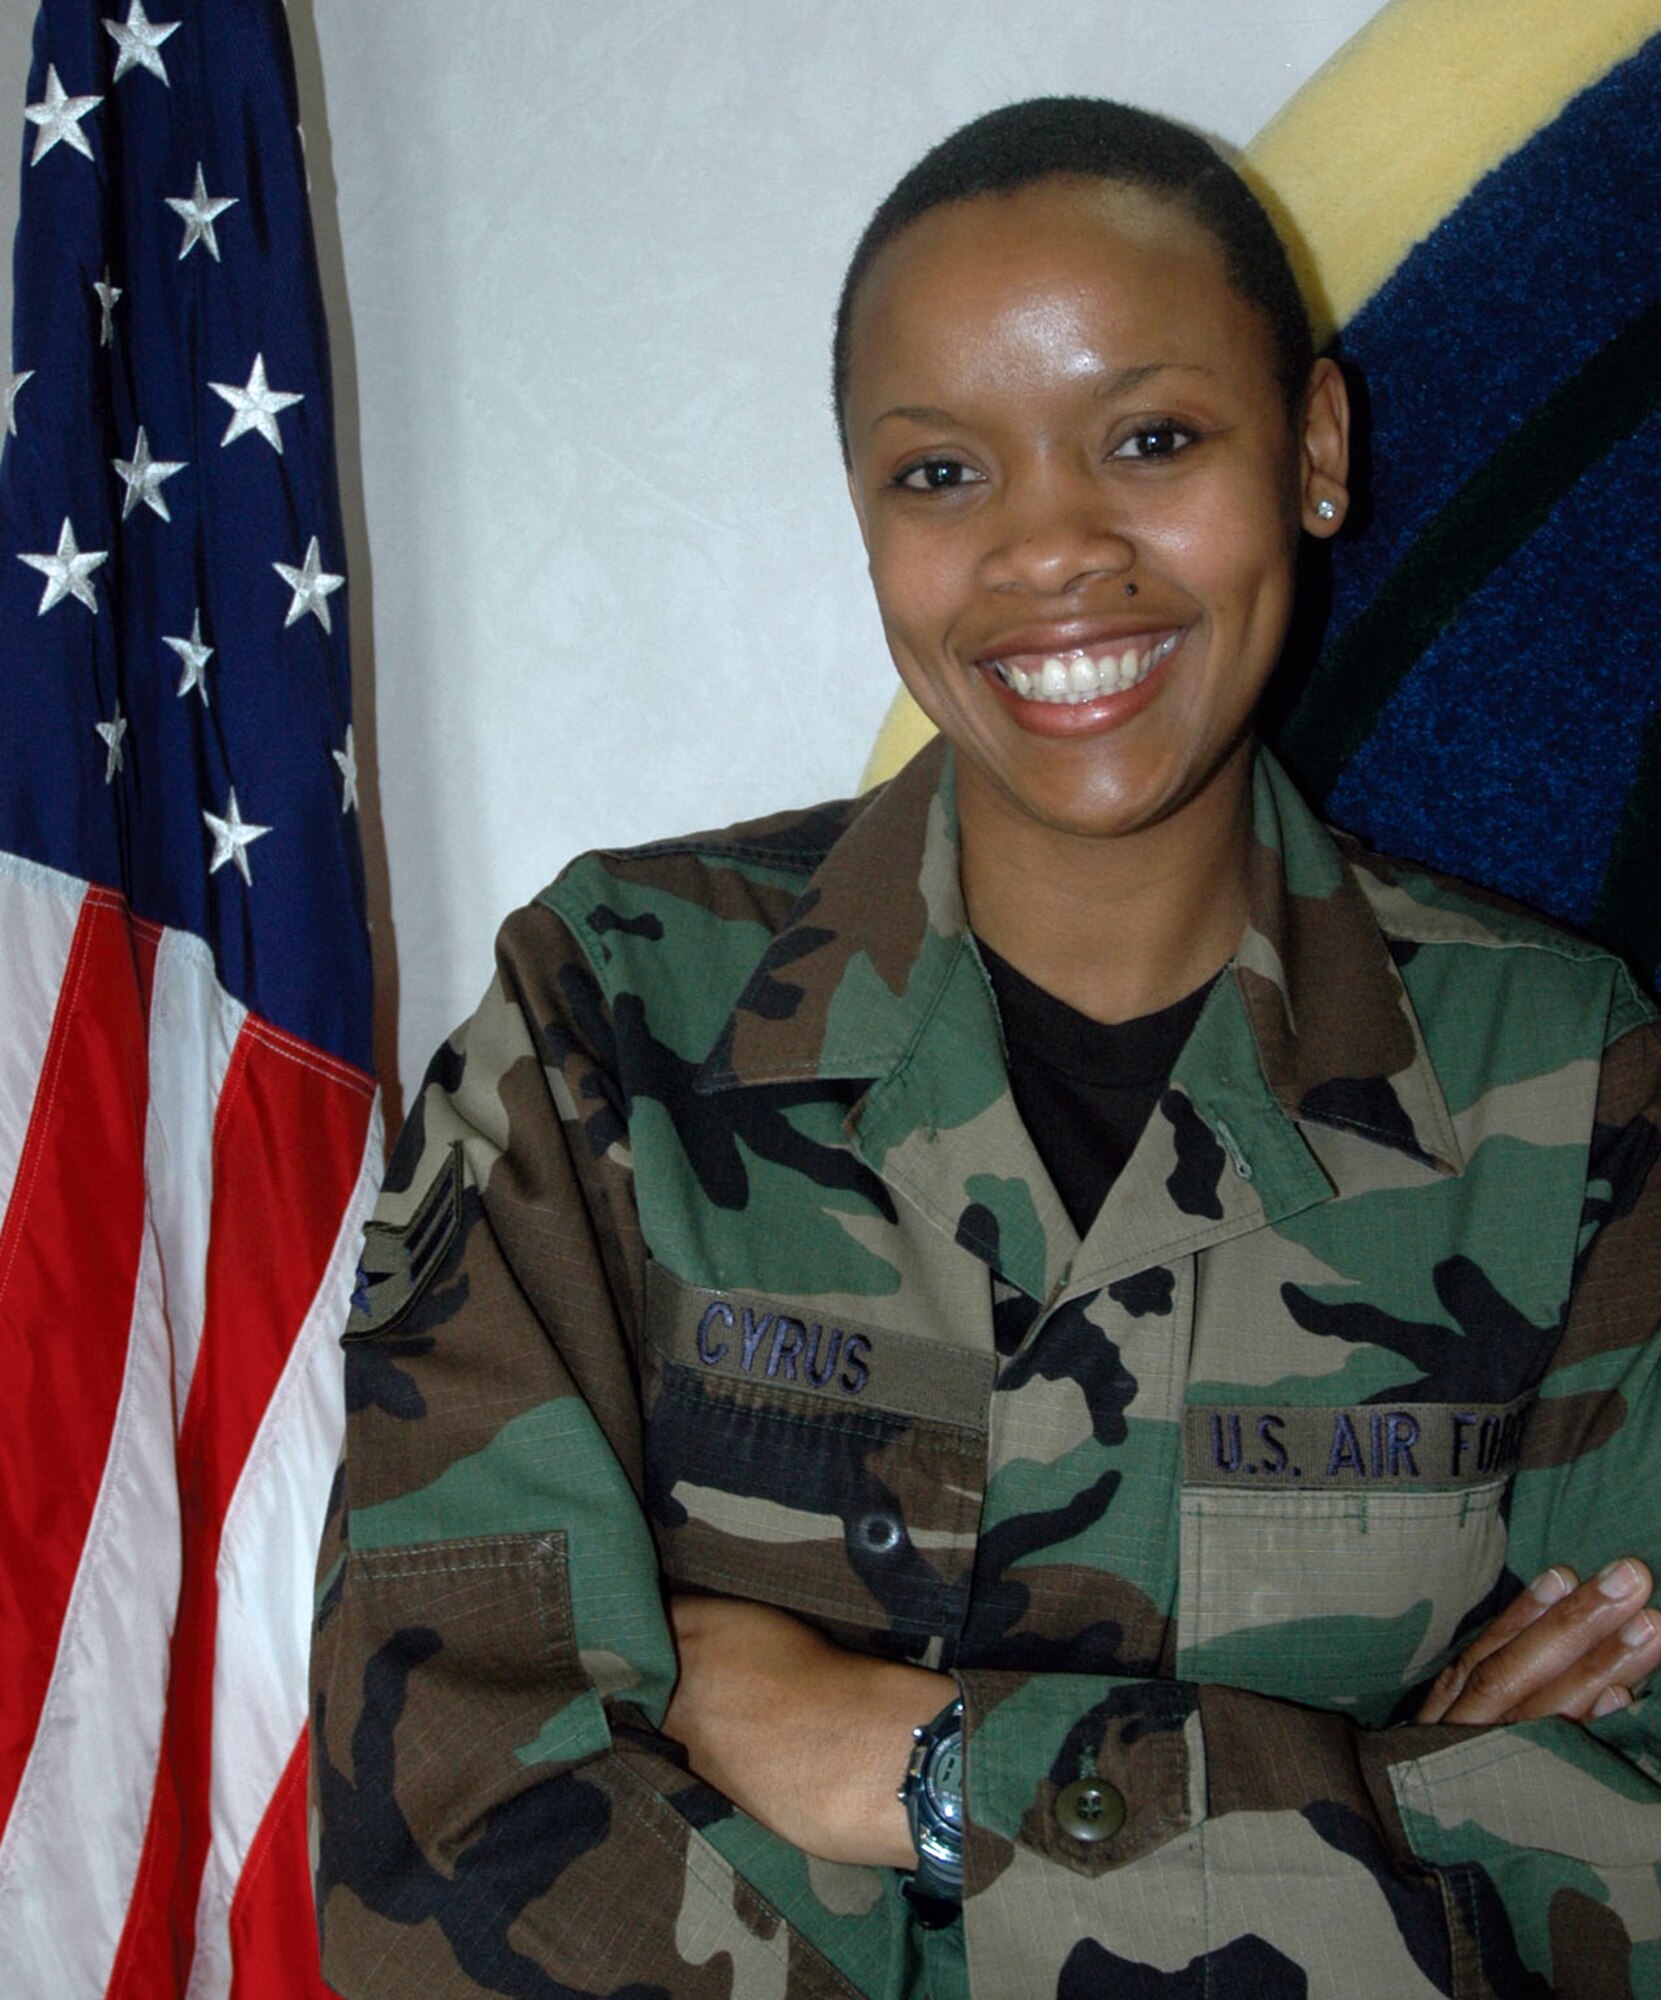 MCCHORD AIR FORCE BASE, Wash., - Airman First Class Nicole Cyrus, a Reservist with the 728th Airlift Squadron, became a U.S. citizen March 20. A native of the Caribbean island Trinidad and Tobago, Airman Cyrus immigrated to western Washington in 2001.